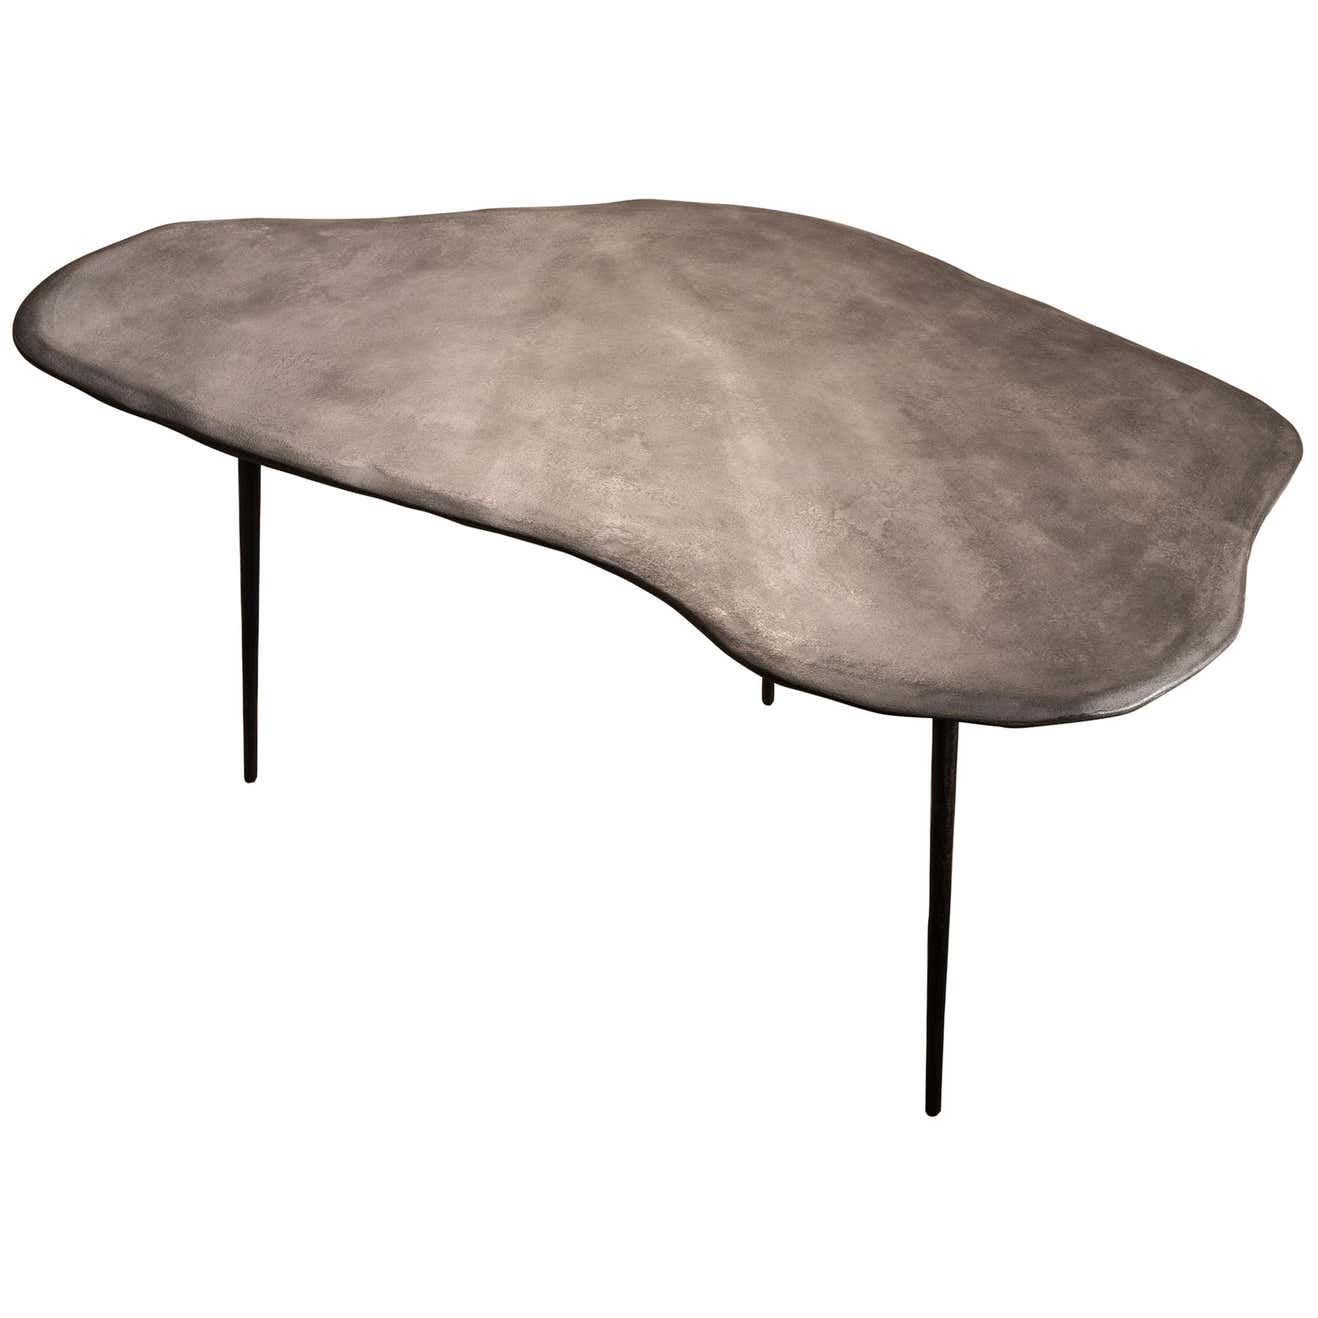 Andrea Table / 200 L x 90 D x 75 H - Kanaba Home #